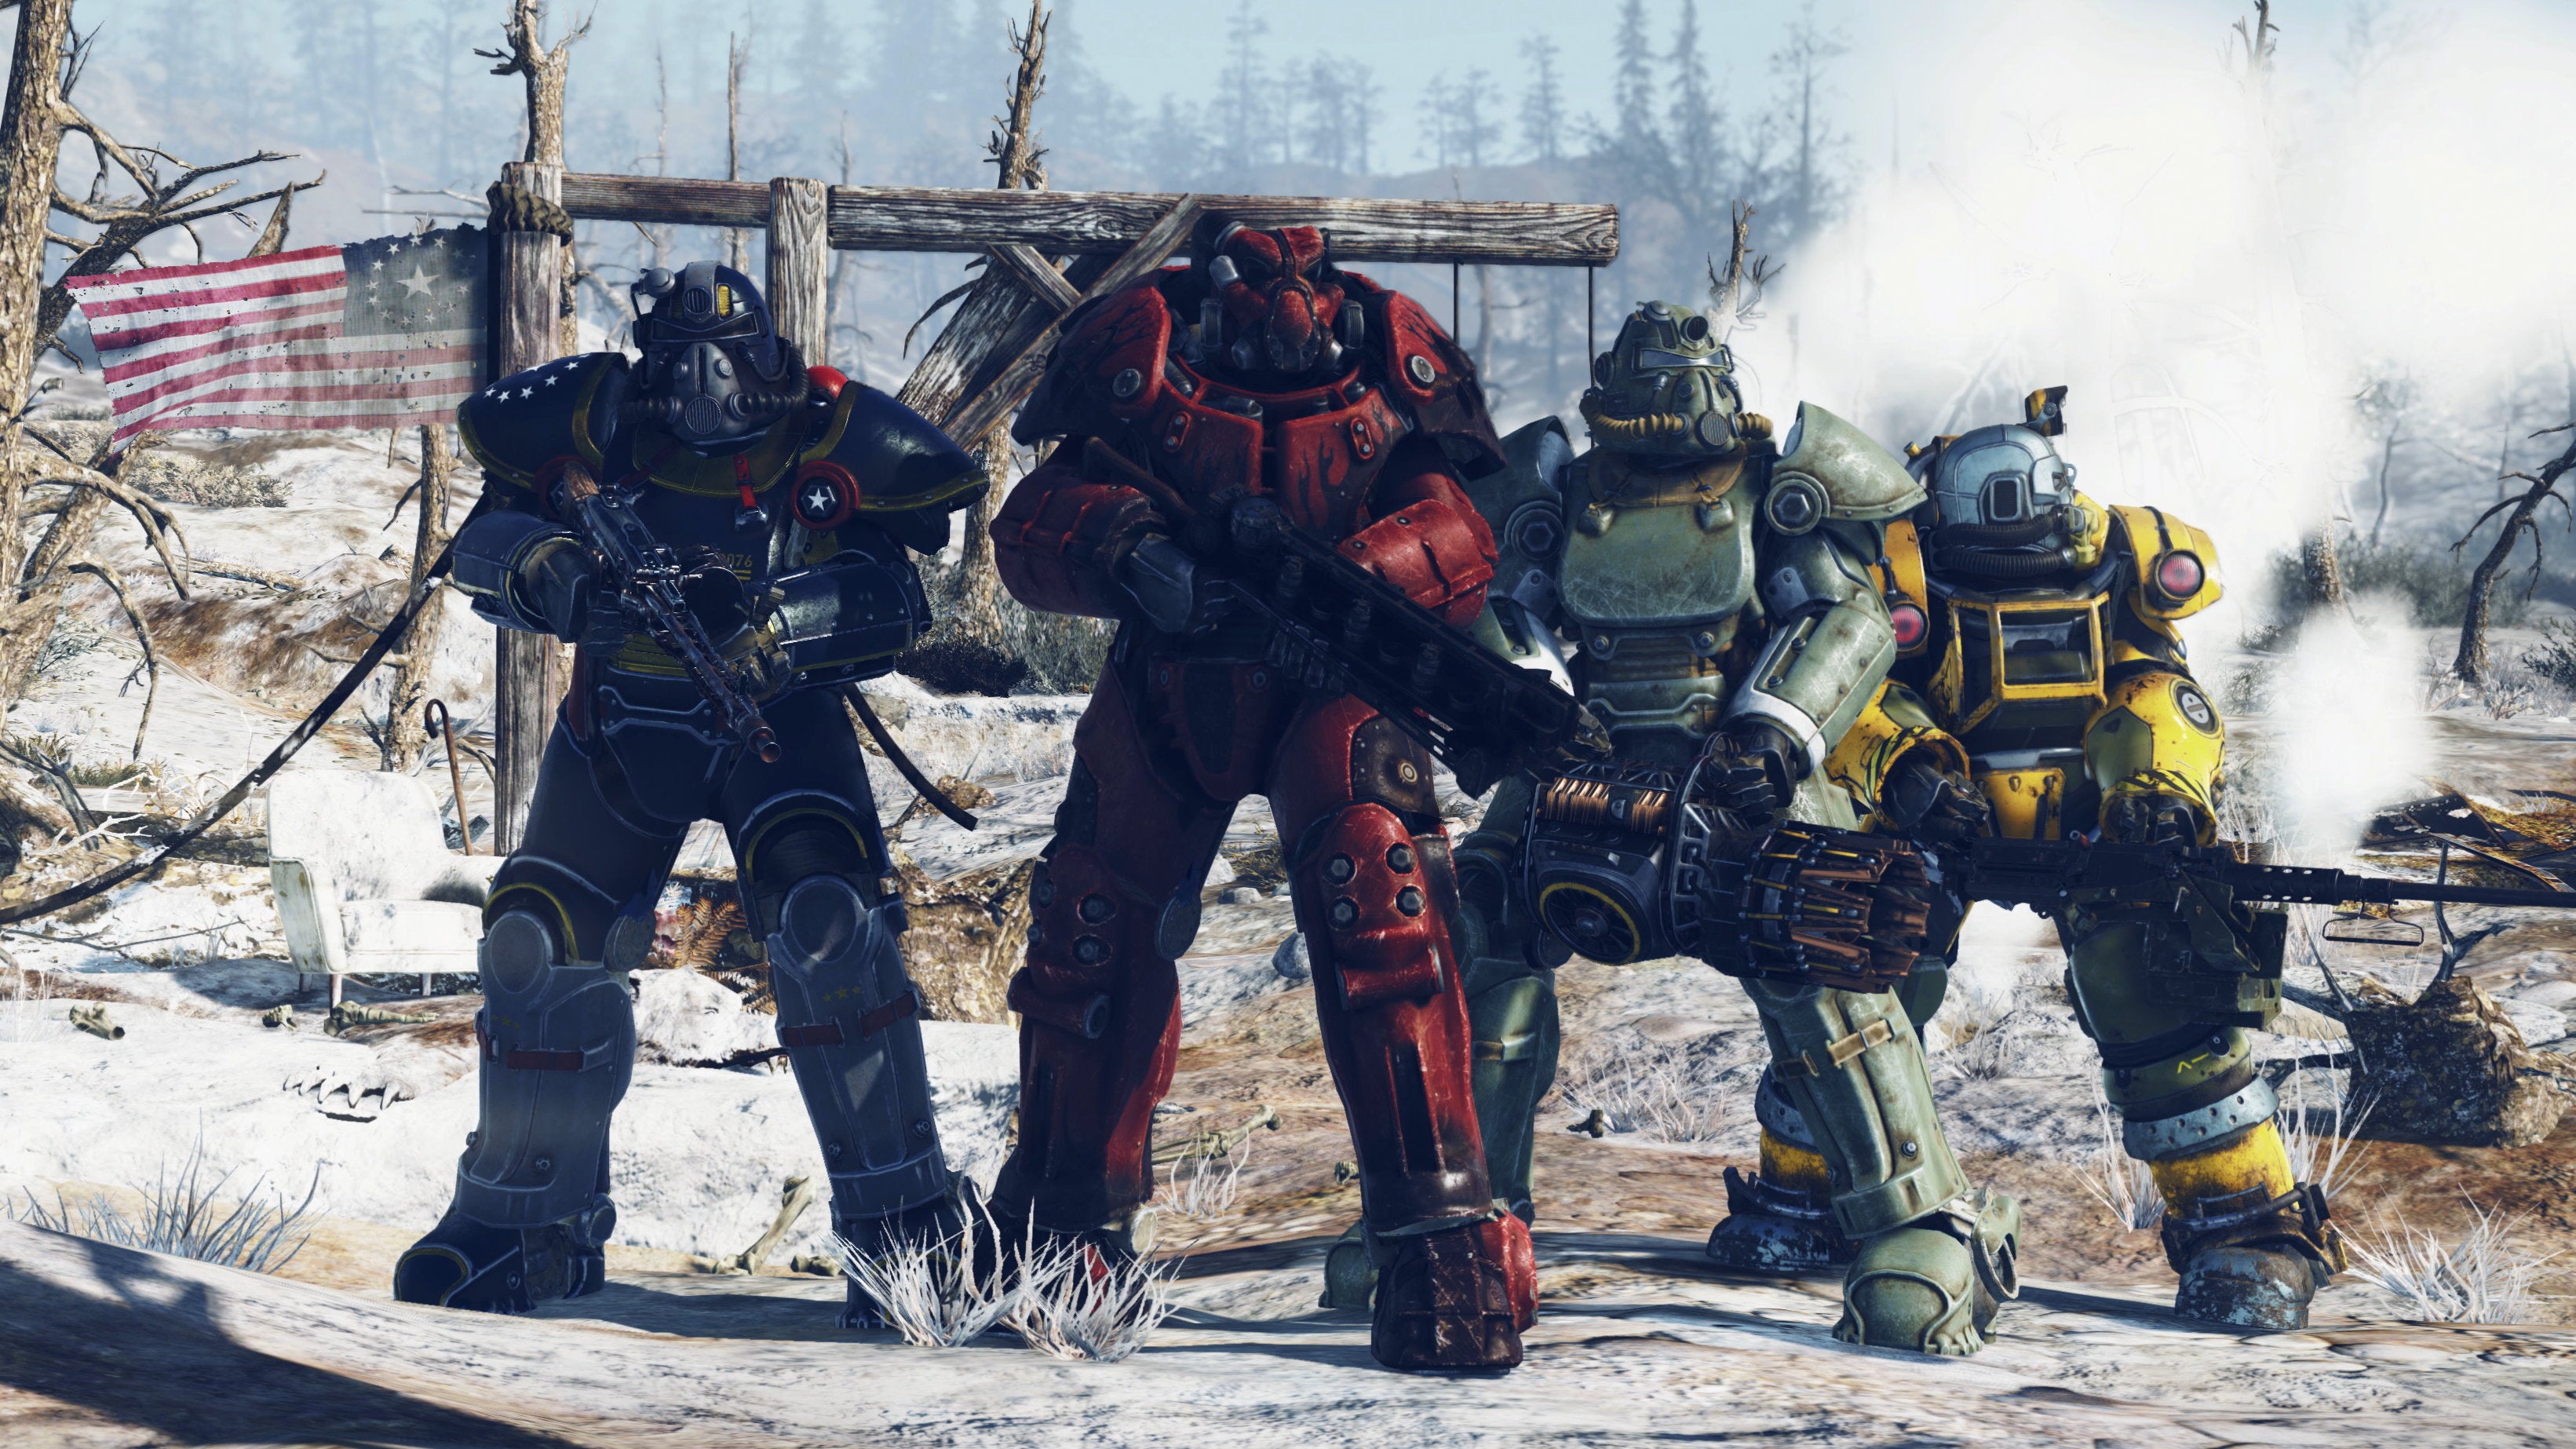 Image for Fallout 76 Power Armor locations: where to find Power Armor